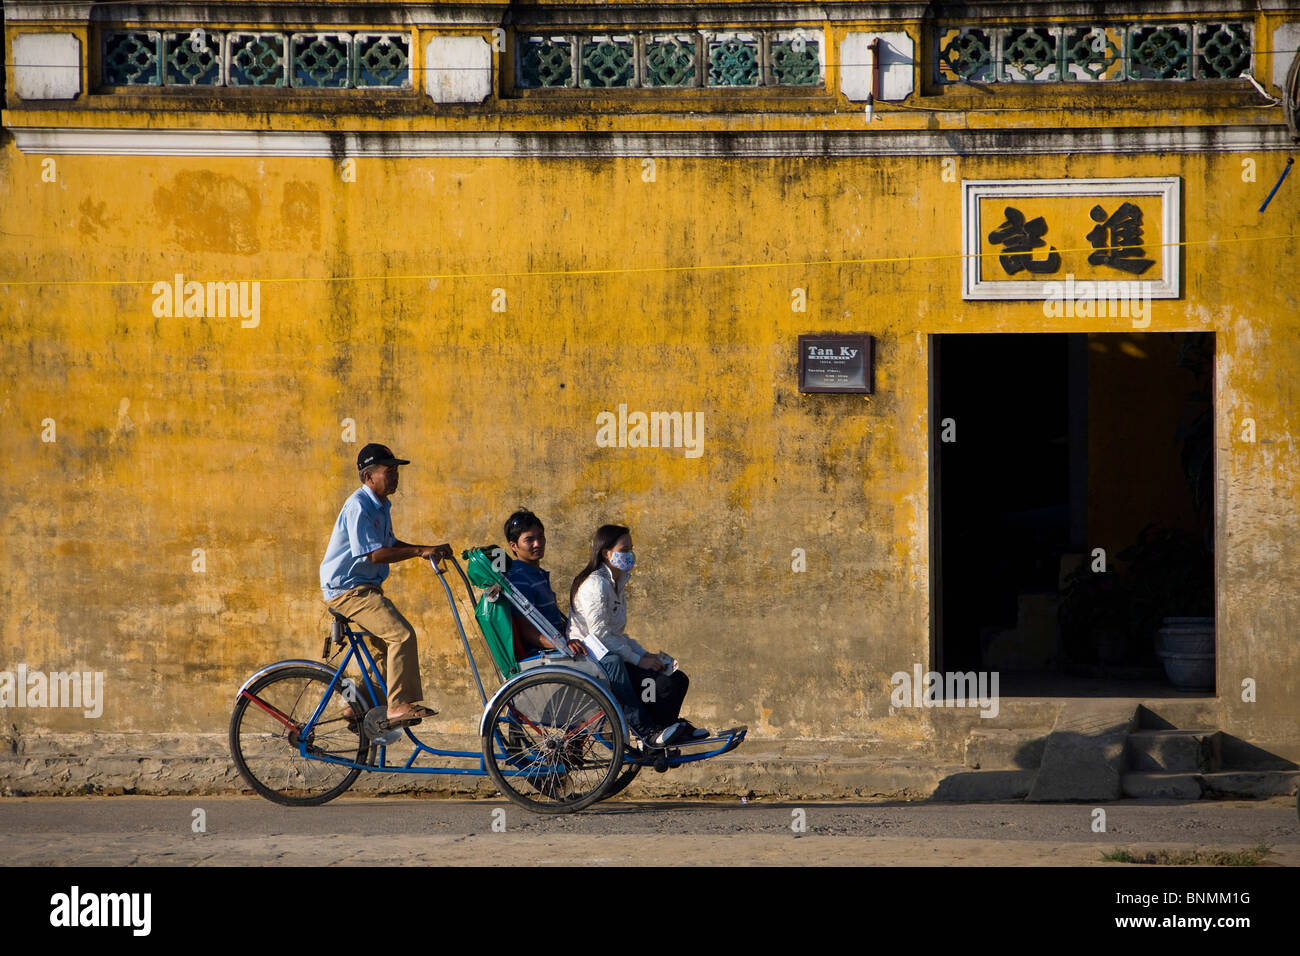 Vietnam Asia Far East Hoi An Tan Ky building construction bicycle bike taxi traveling place of interest landmark Stock Photo